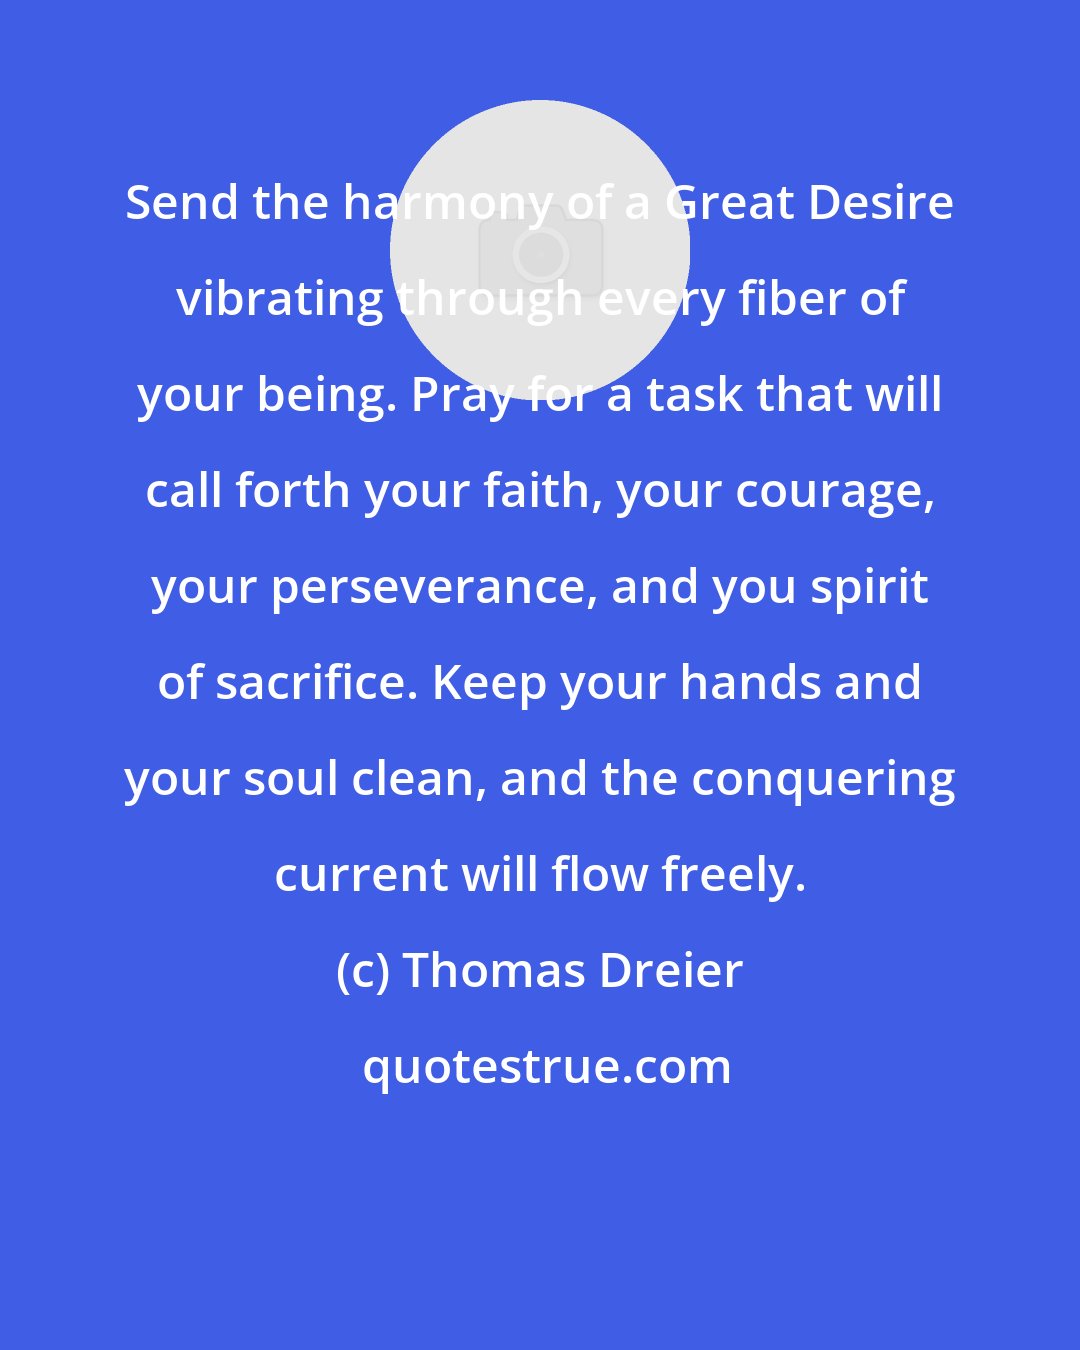 Thomas Dreier: Send the harmony of a Great Desire vibrating through every fiber of your being. Pray for a task that will call forth your faith, your courage, your perseverance, and you spirit of sacrifice. Keep your hands and your soul clean, and the conquering current will flow freely.